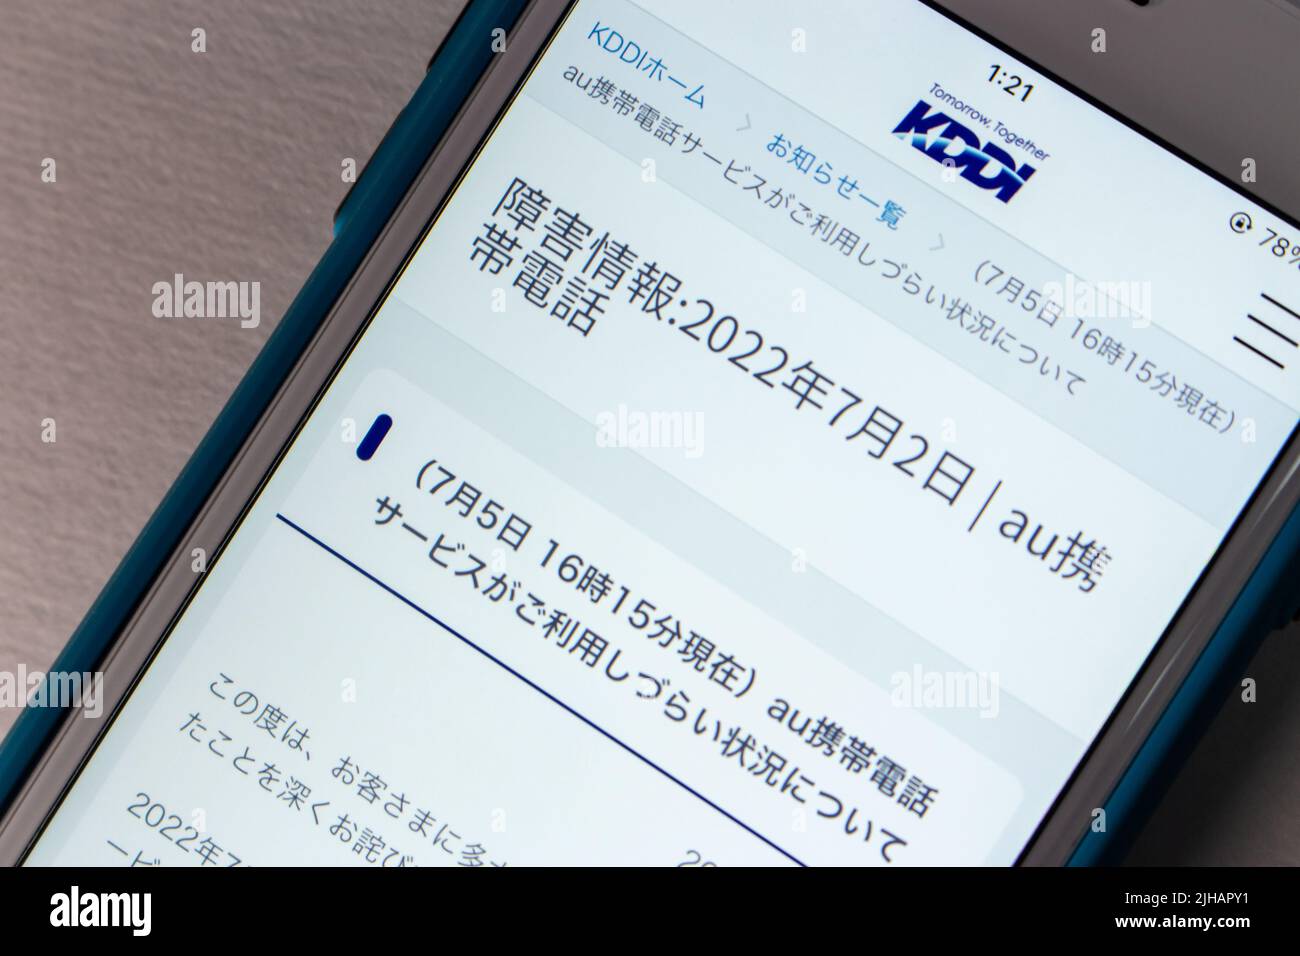 Phone displays Information about network disruptions in KDDI website. In Jul 2022, Japan's mobile carrier au by KDDI experienced 3-day network outages Stock Photo